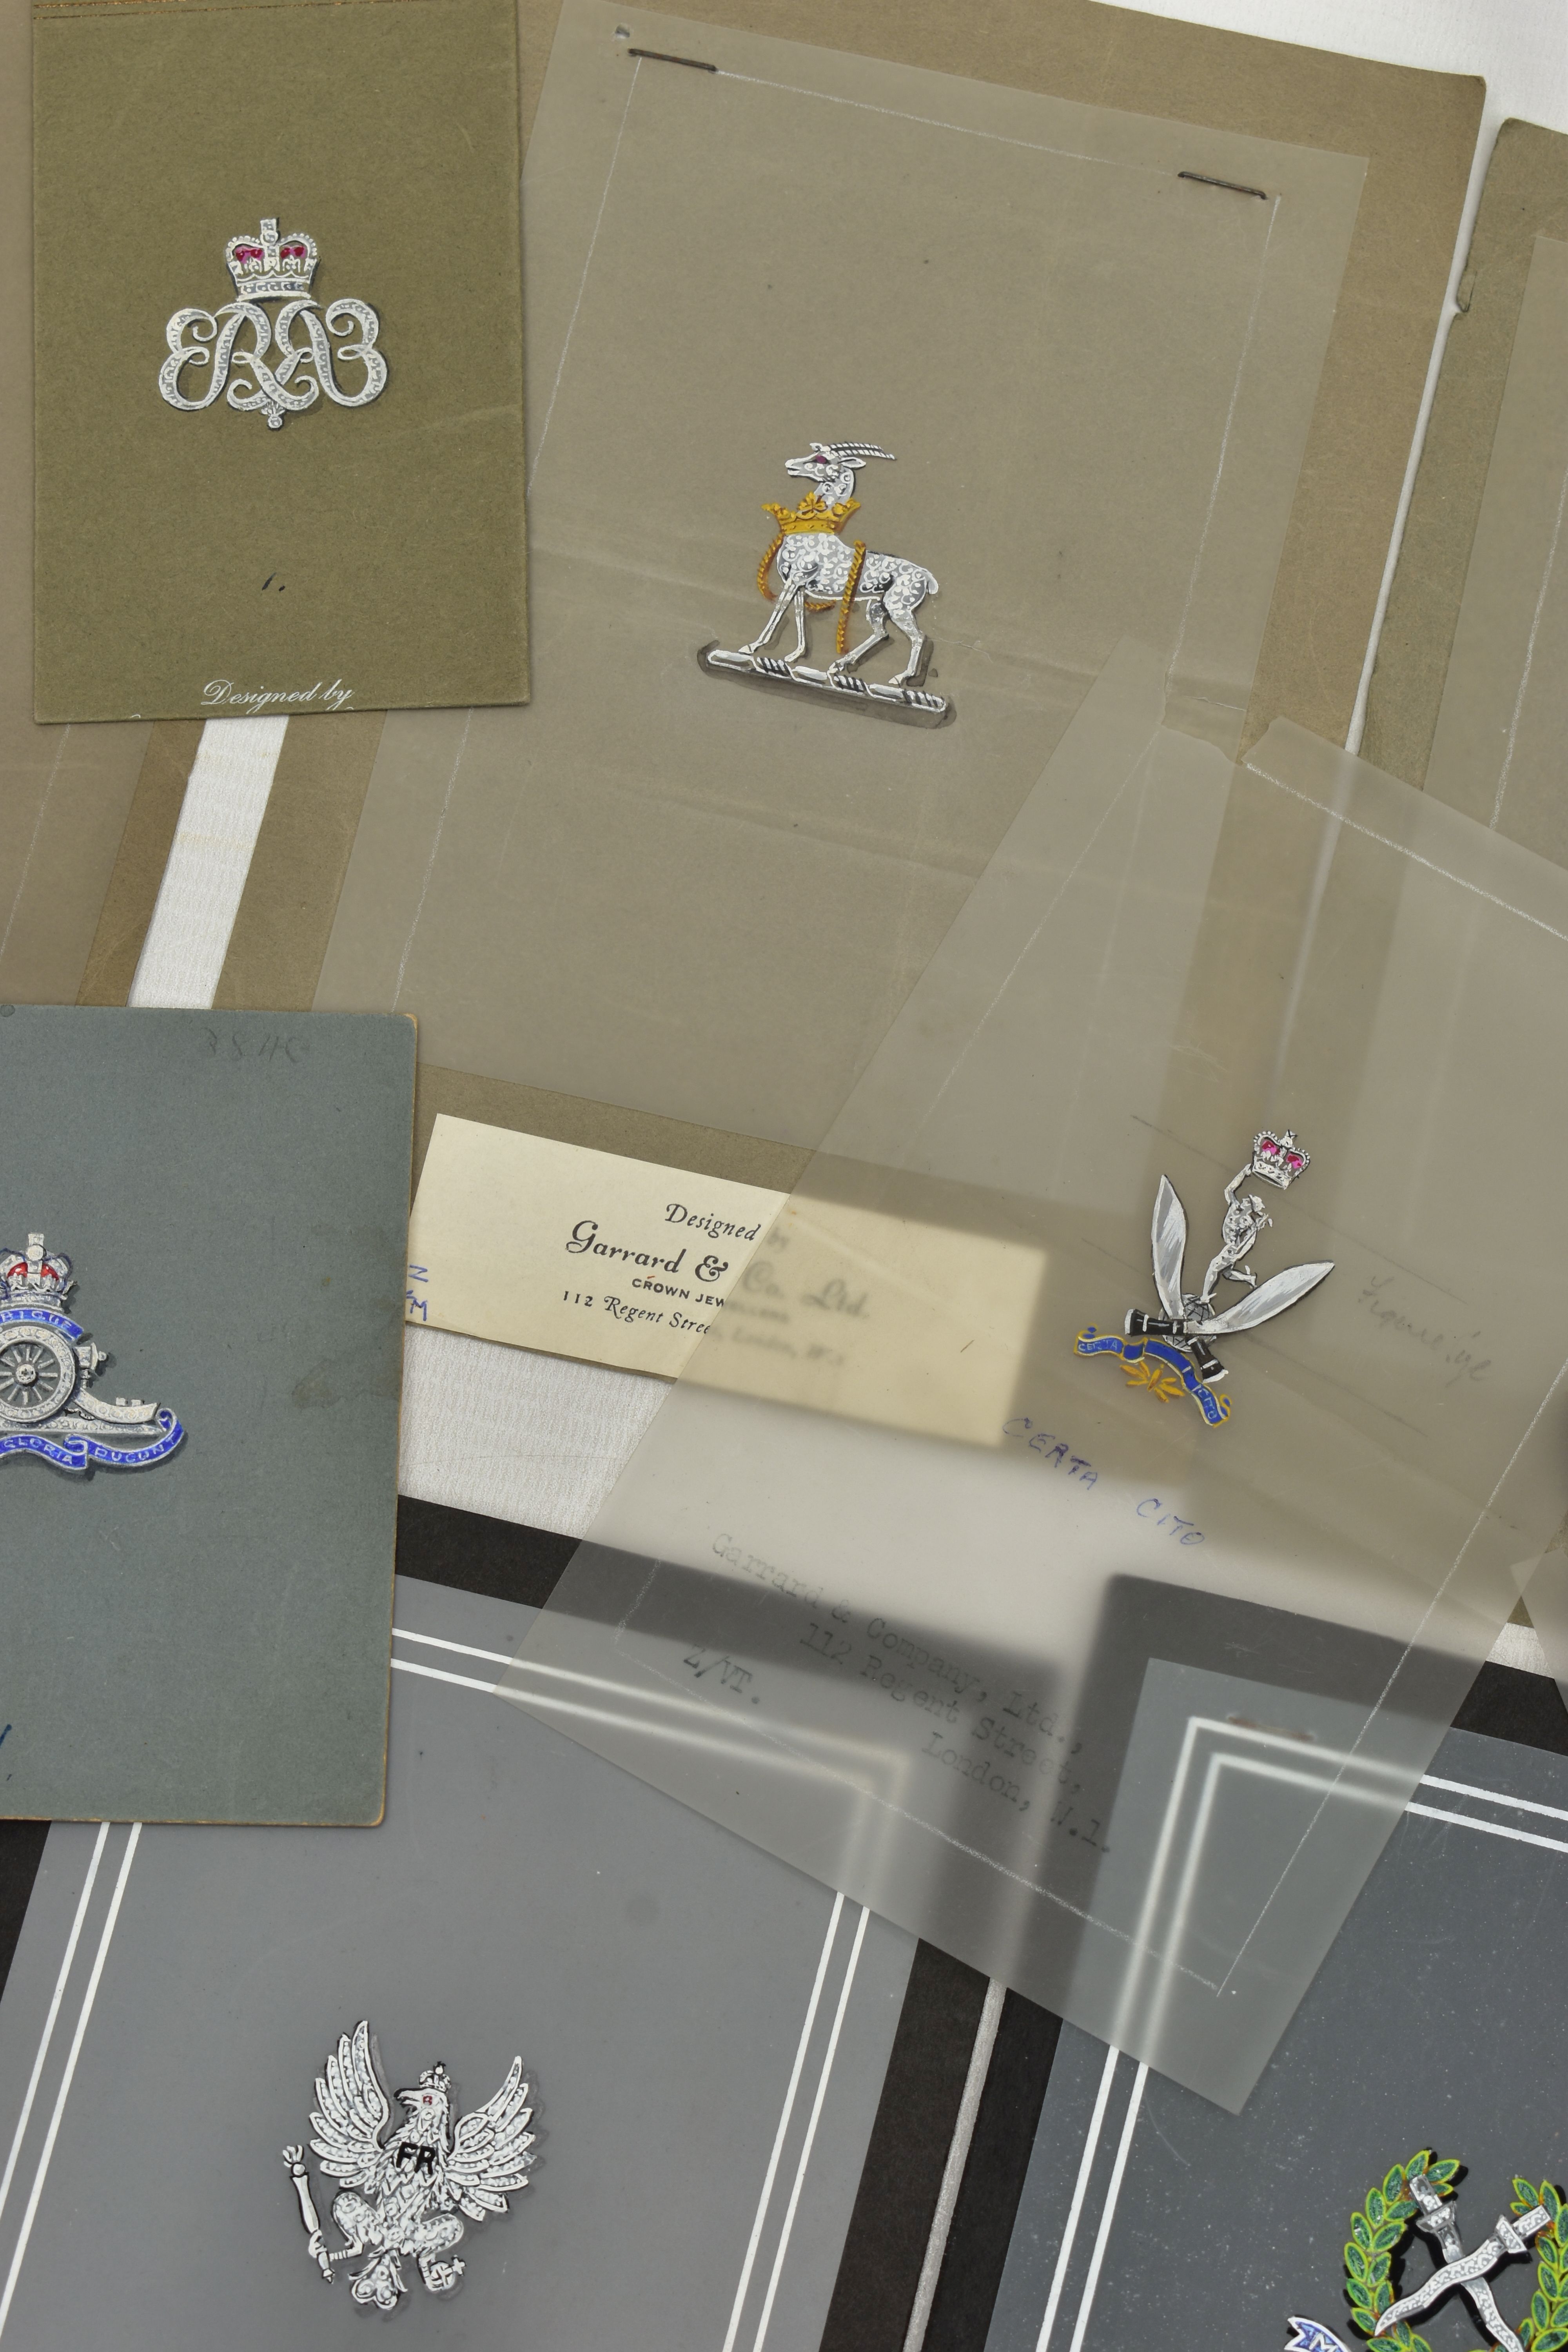 A COLLECTION OF 'GARRARD & CO LTD' EARLY TO MID 20TH CENTURY GOUACHE JEWELLERY DESIGN ILLUSTRATIONS, - Image 4 of 12